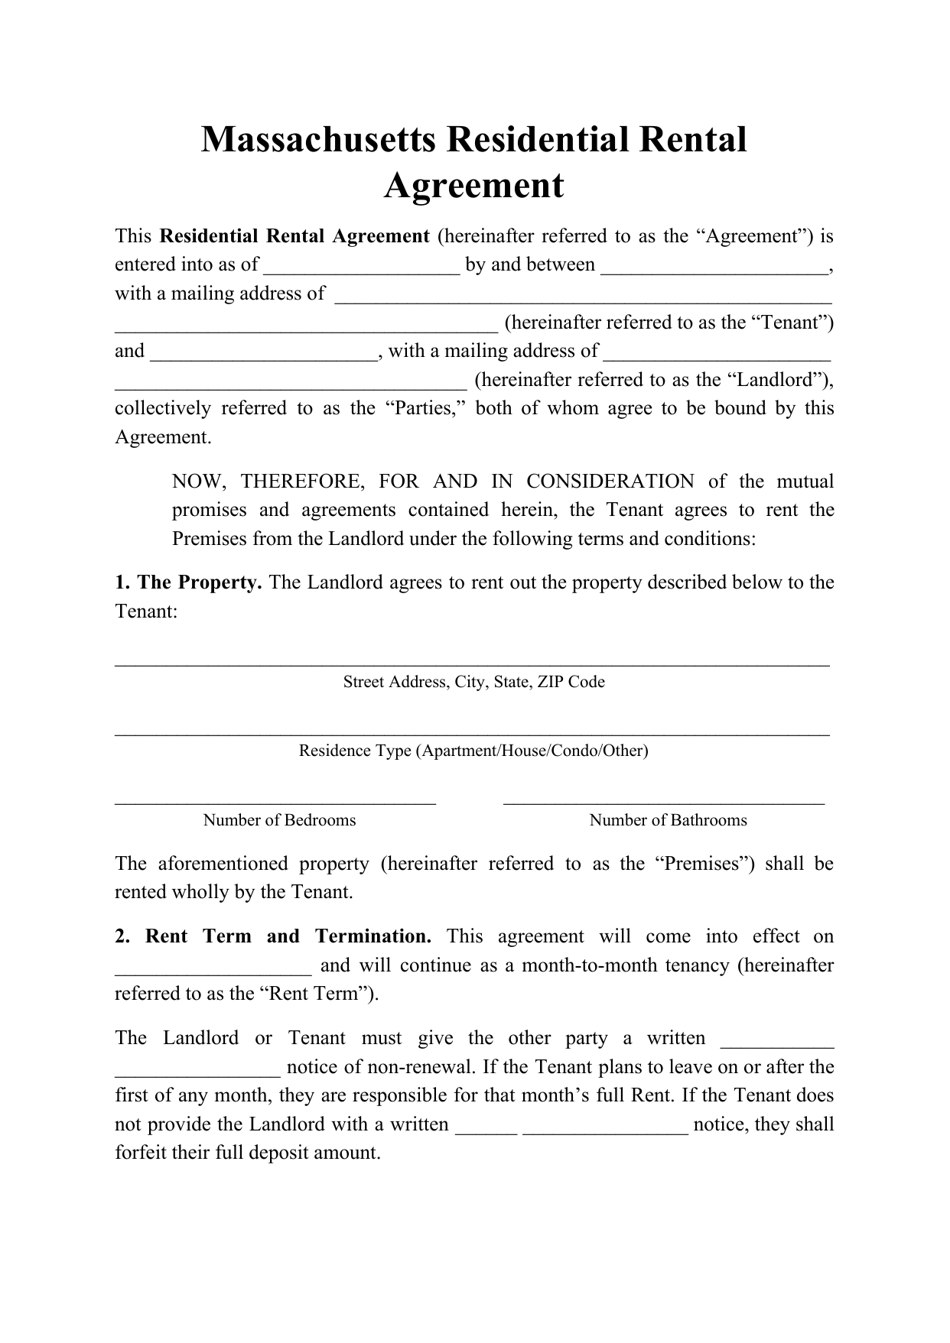 Residential Rental Agreement Template - Massachusetts, Page 1